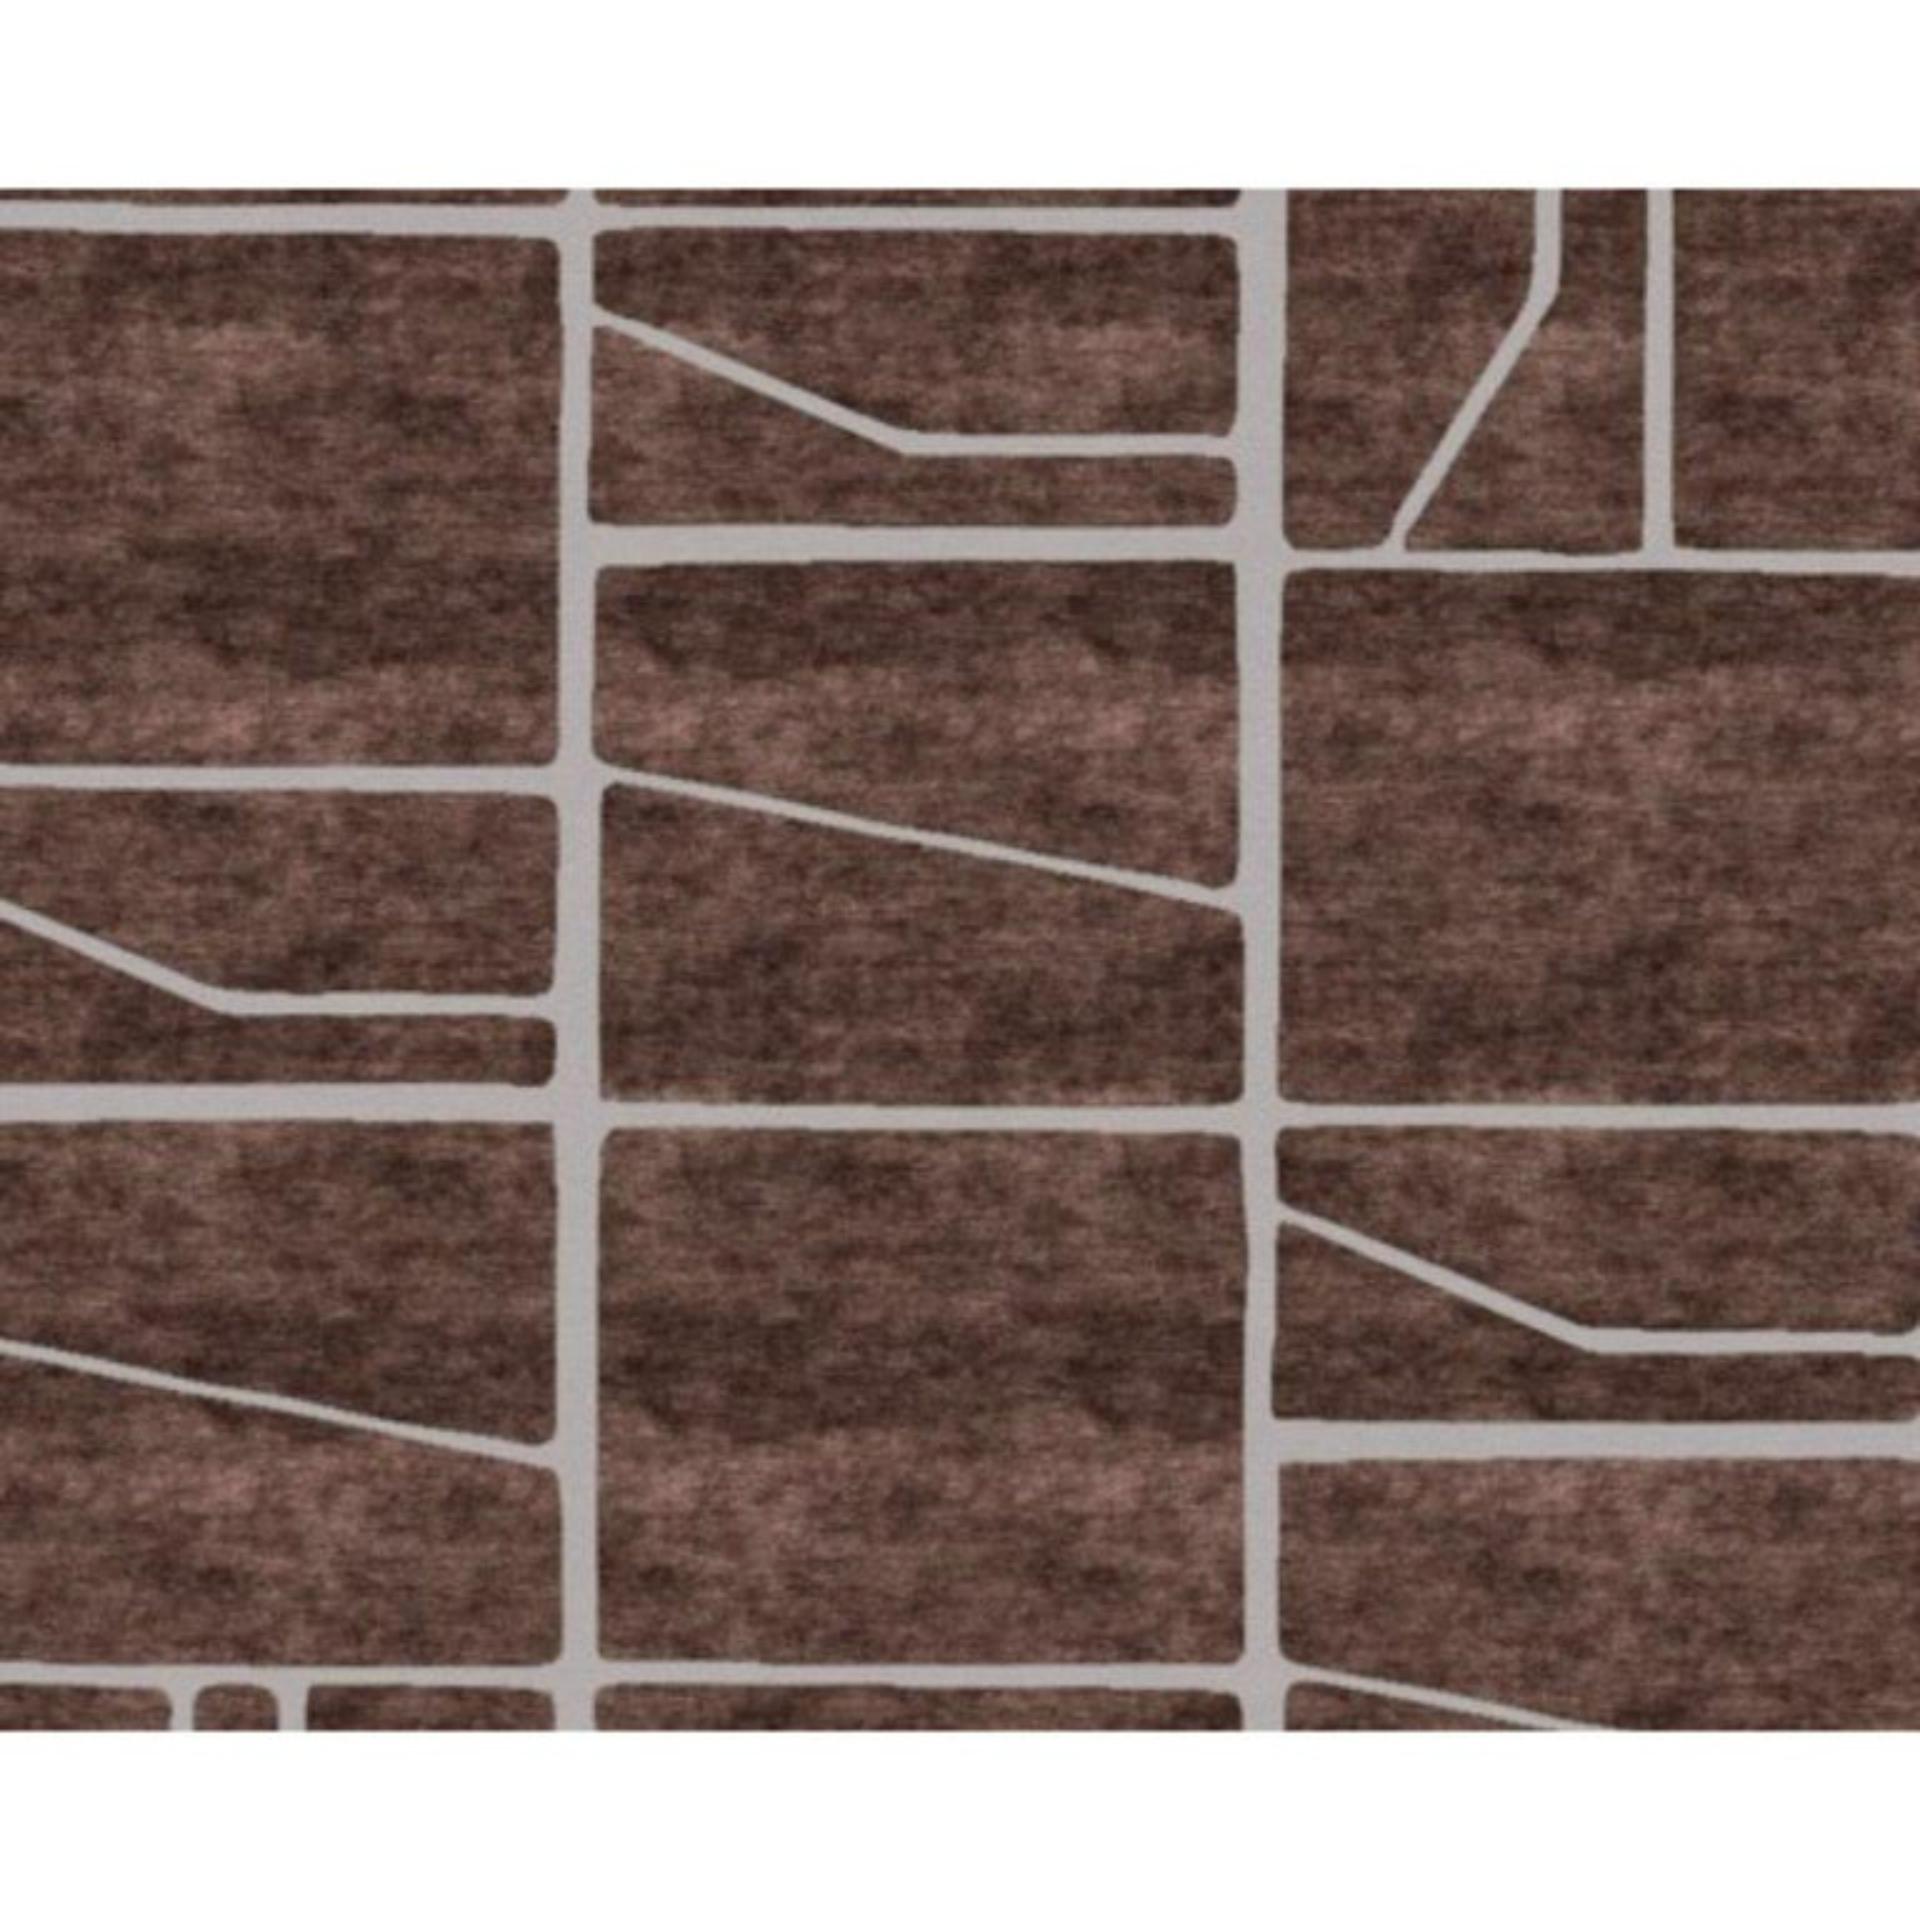 Terracotta Tiles medium rug by Art & Loom
Dimensions: D274.3 x H365.8 cm
Materials: New Zealand wool & Chinese silk—loop & cut
Quality (Knots per Inch): 100
Also available in different dimensions.

Samantha Gallacher has always had a keen eye